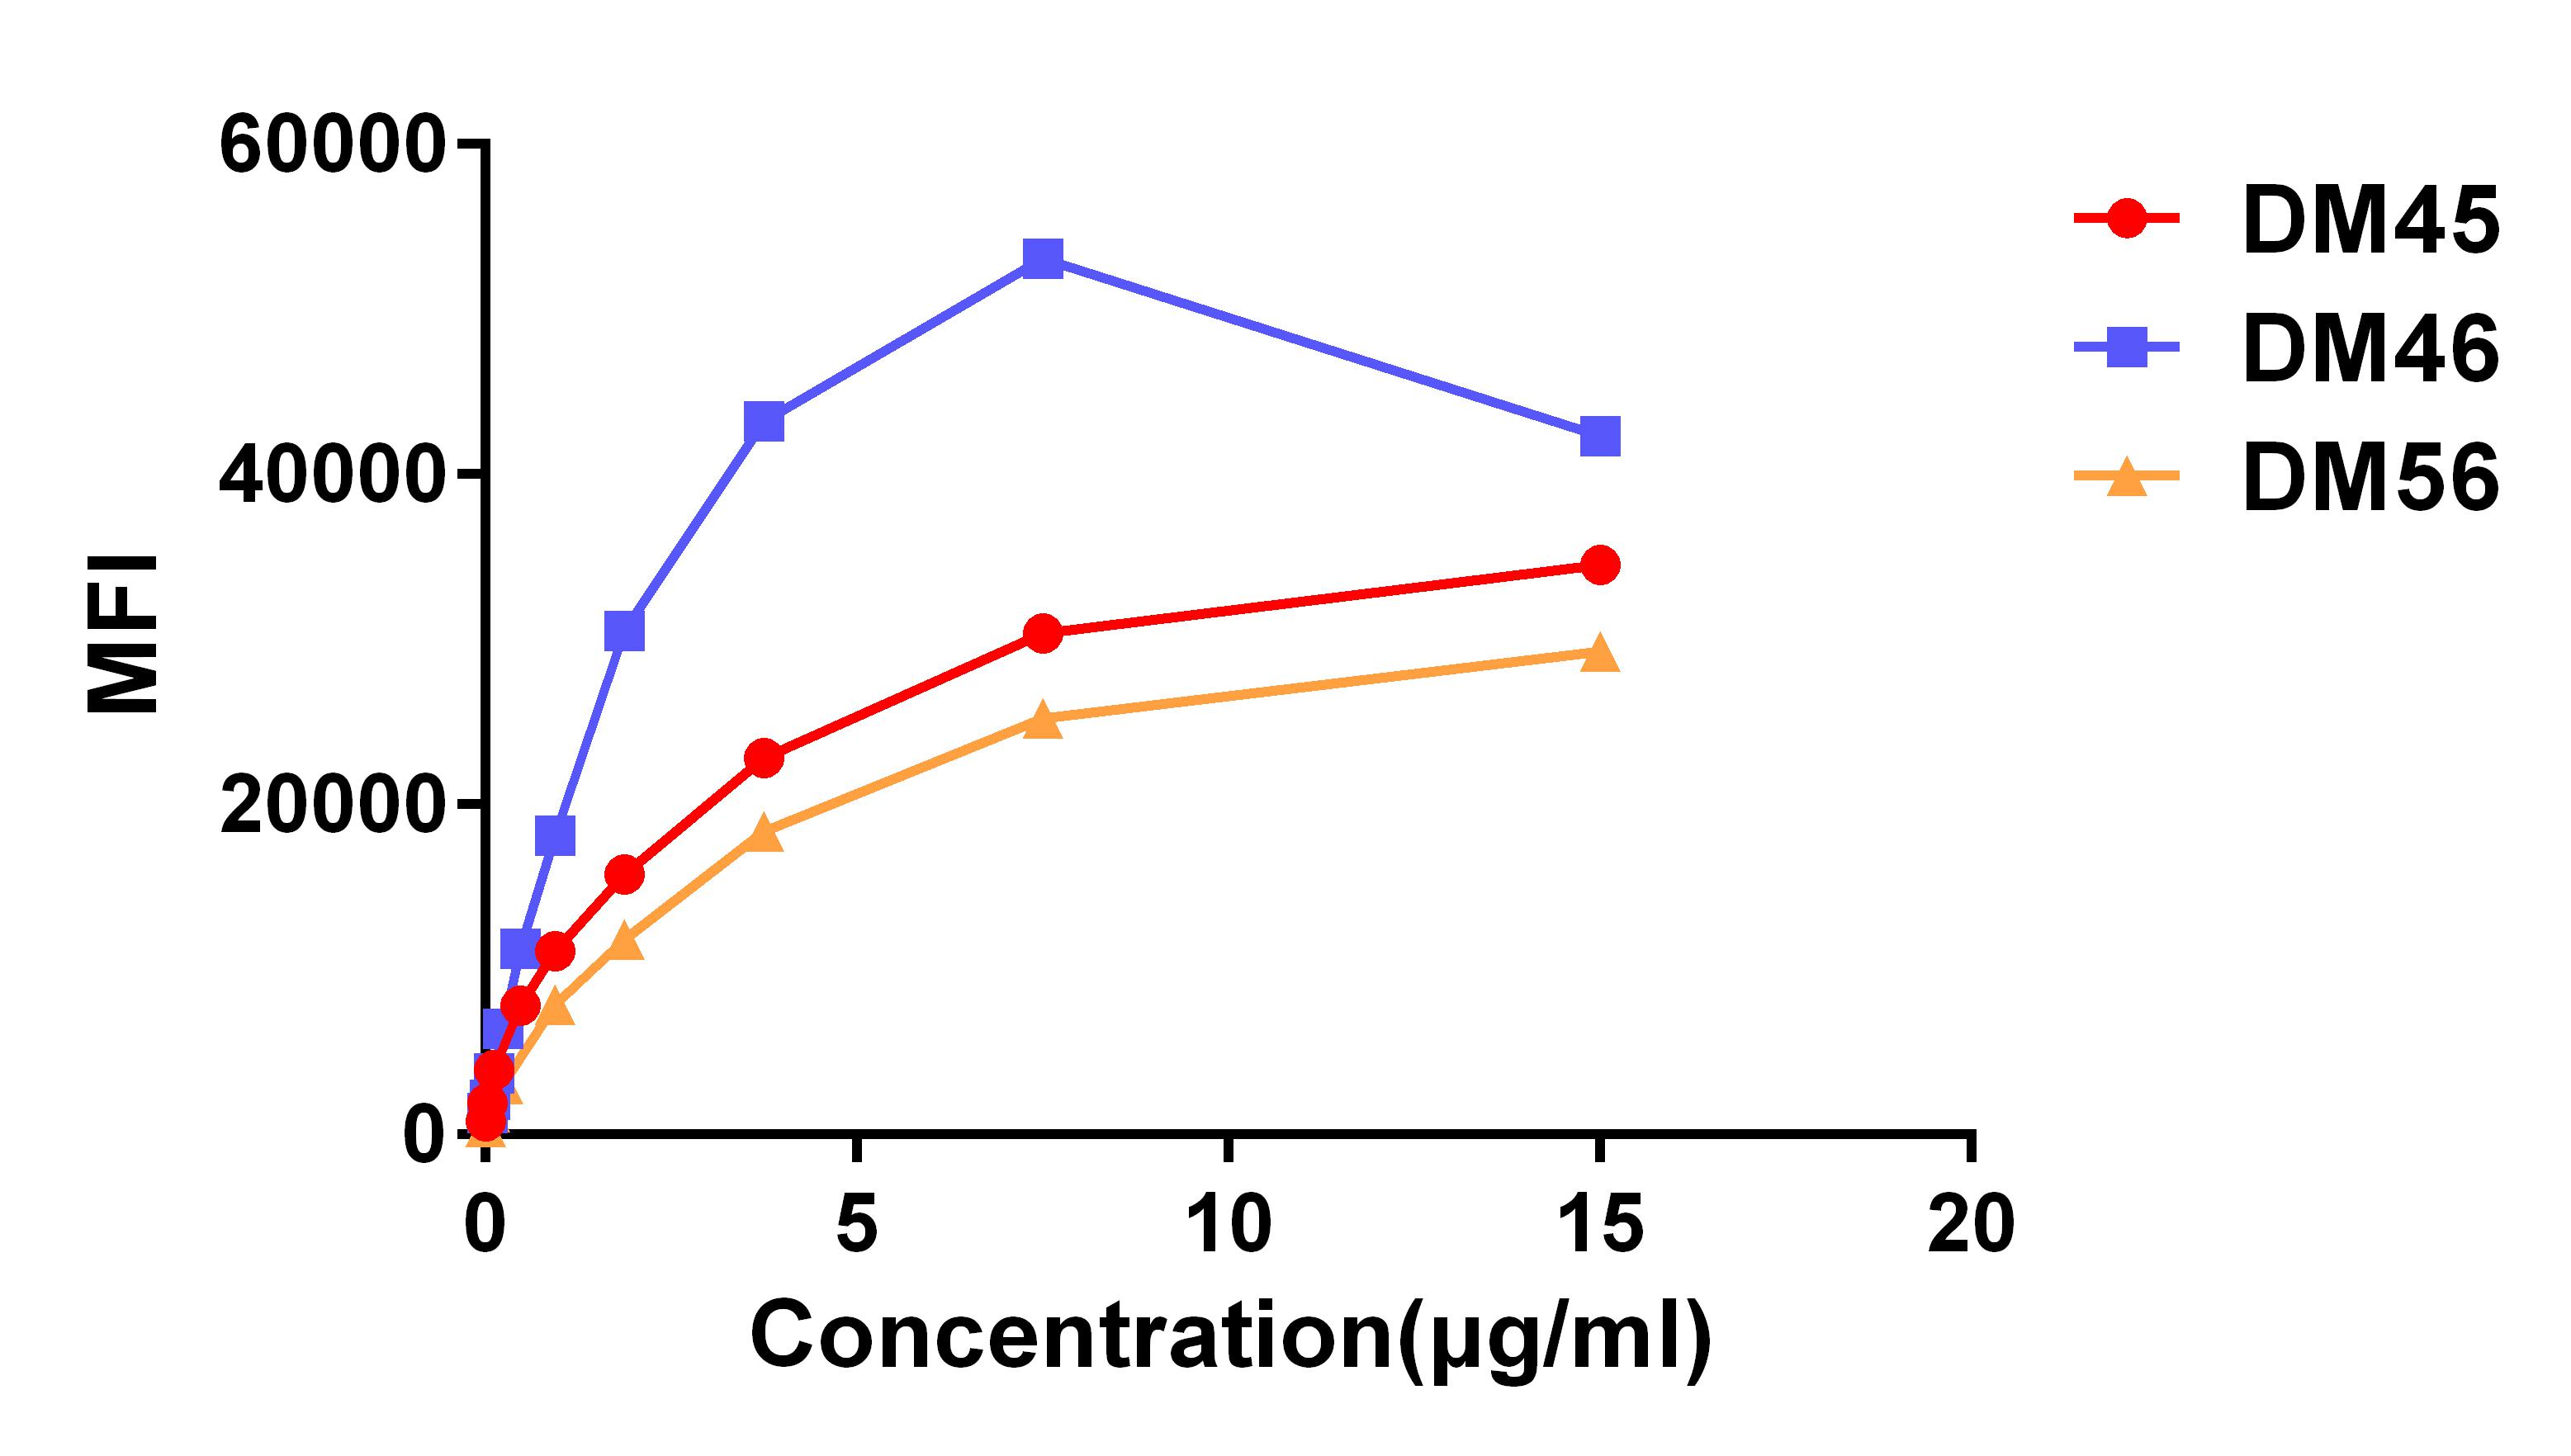 Figure 3. Affinity ranking of different Rabbit anti-CD138 mAb clones by titration of different concentration onto H929 cells. The Y-axis represents the mean fluorescence intensity (MFI) while the X-axis represents the concentration of IgG used.